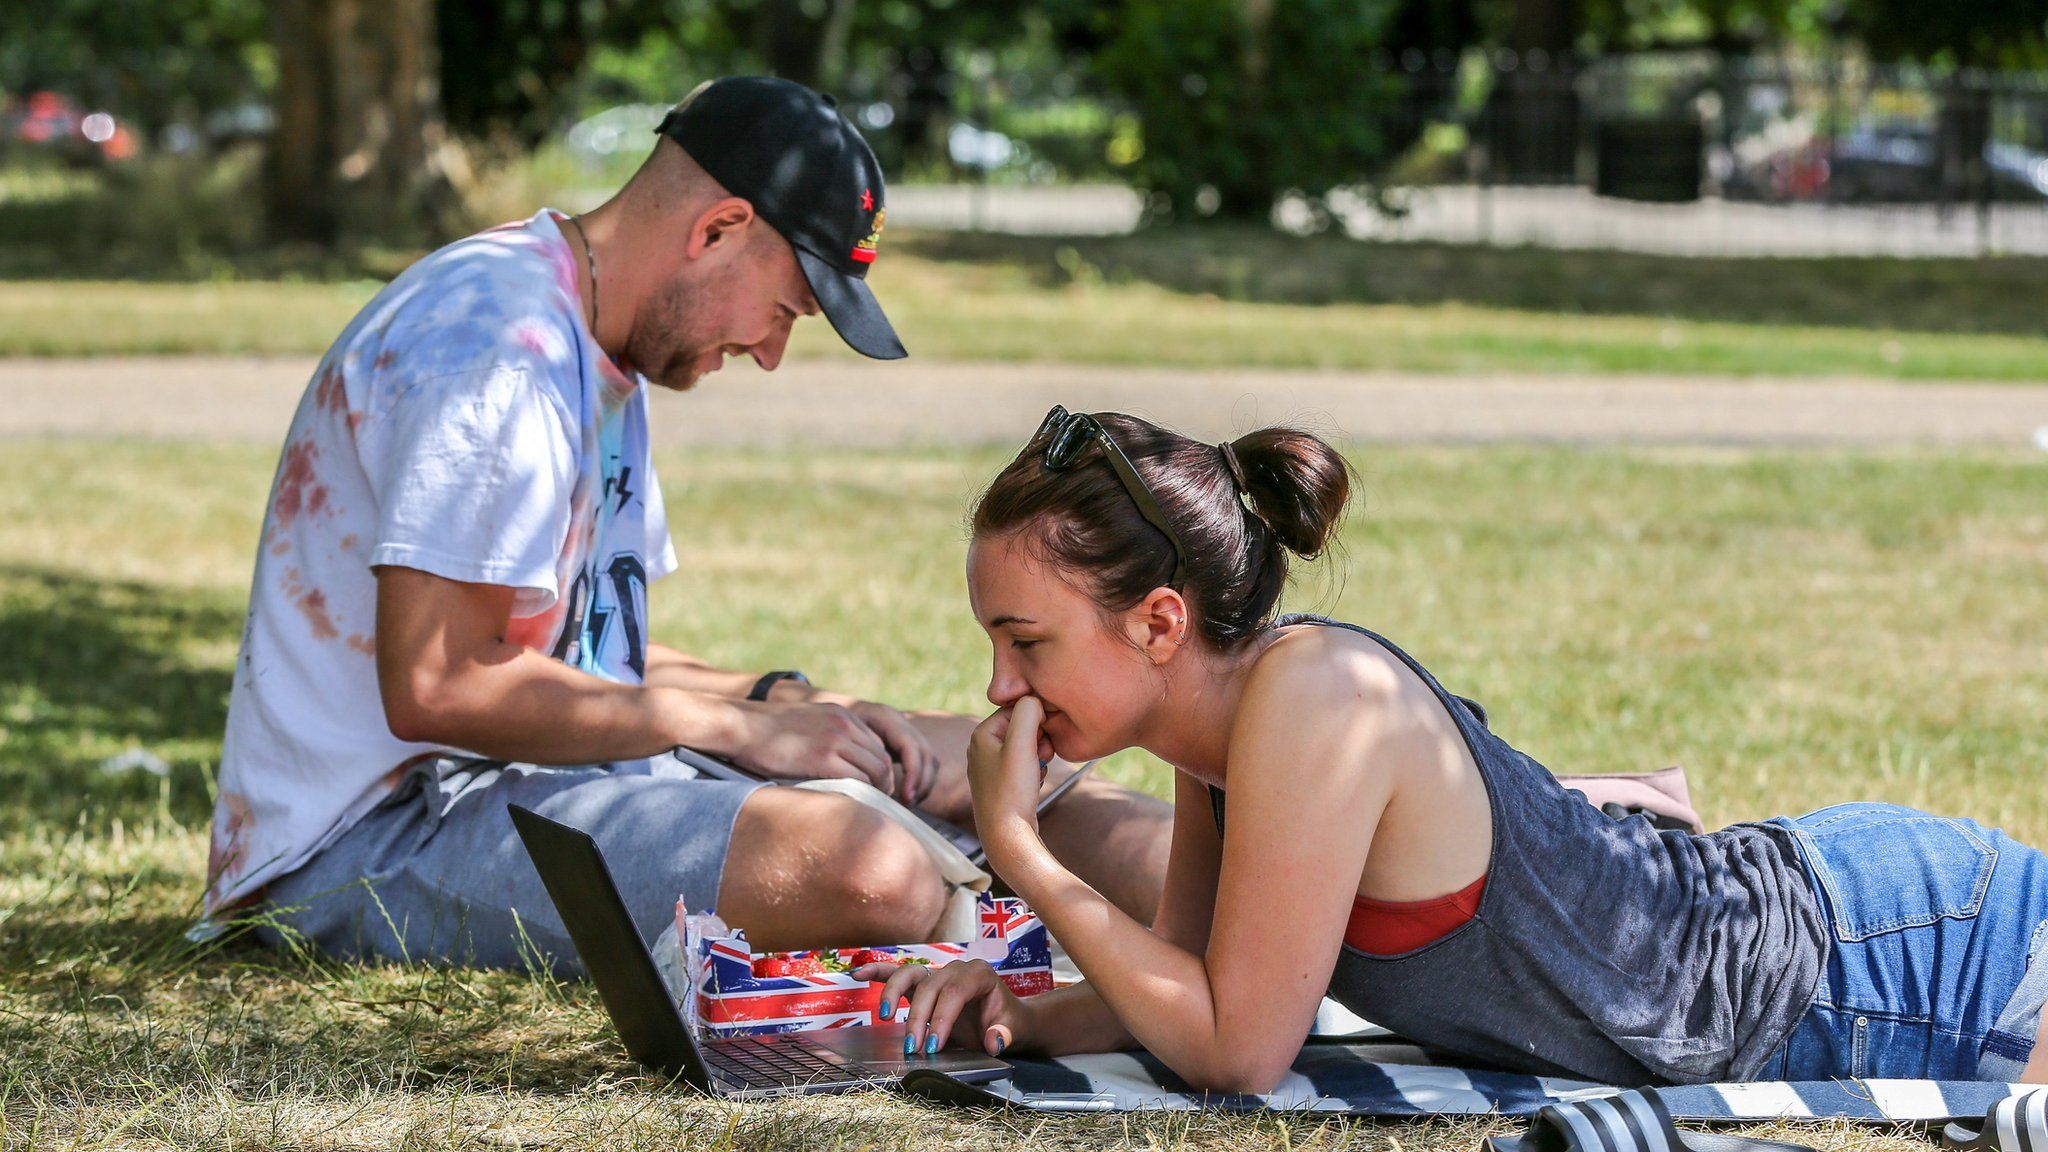 A couple seen working on their laptops under the shade on a hot and sunny day London